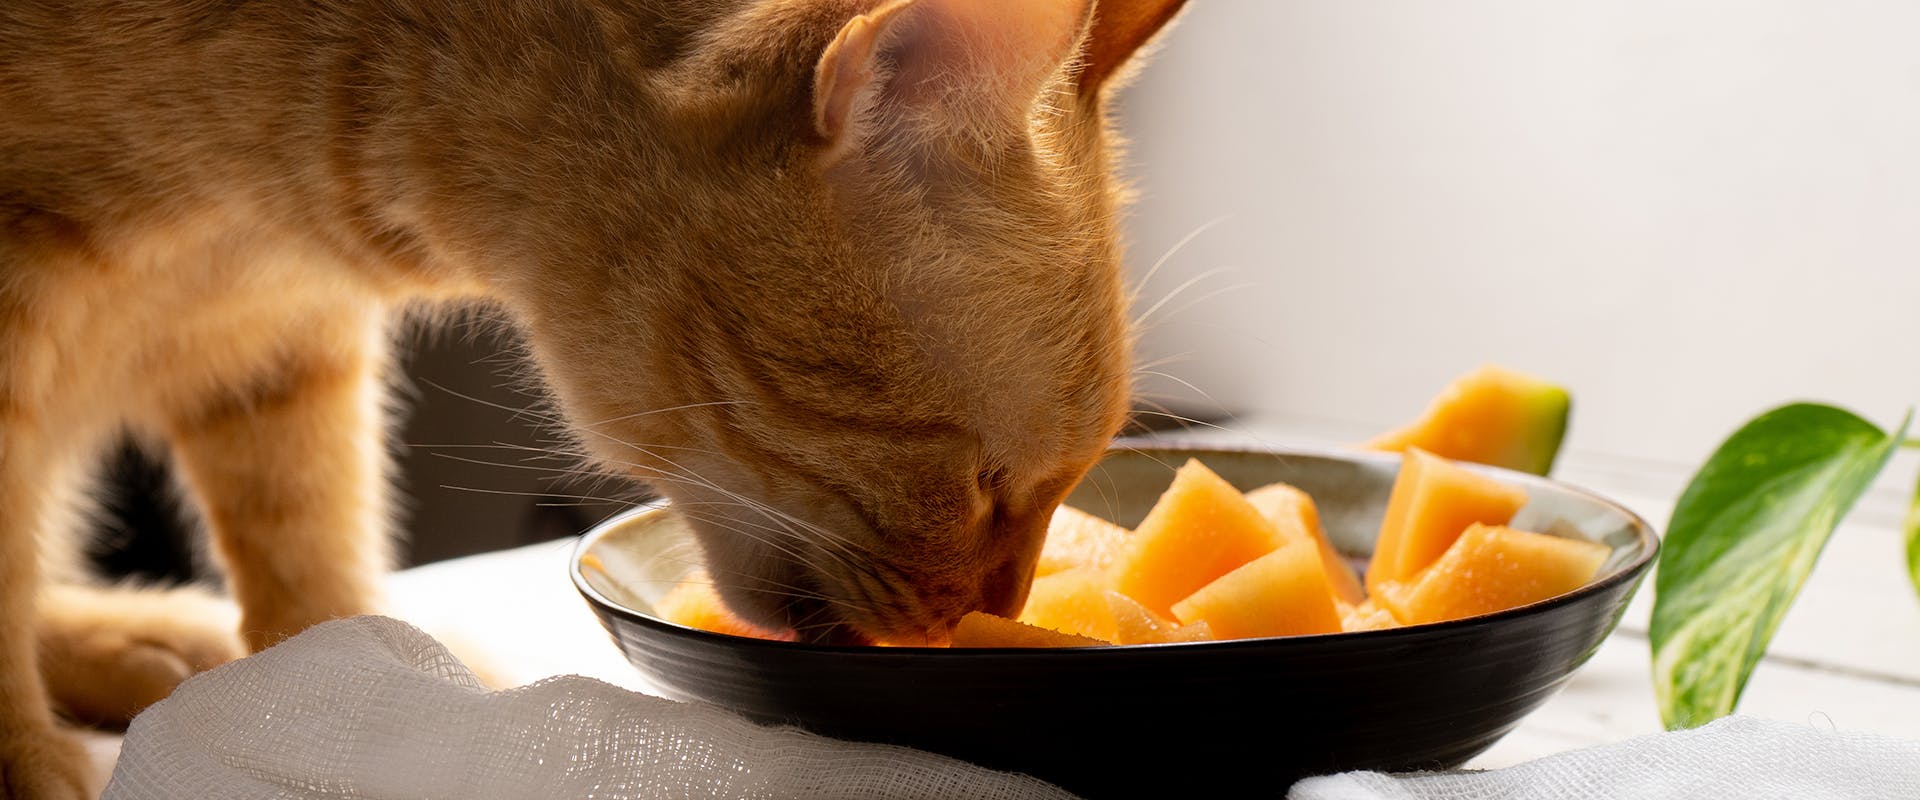 A ginger cat eating a bowl of cantaloupe melon